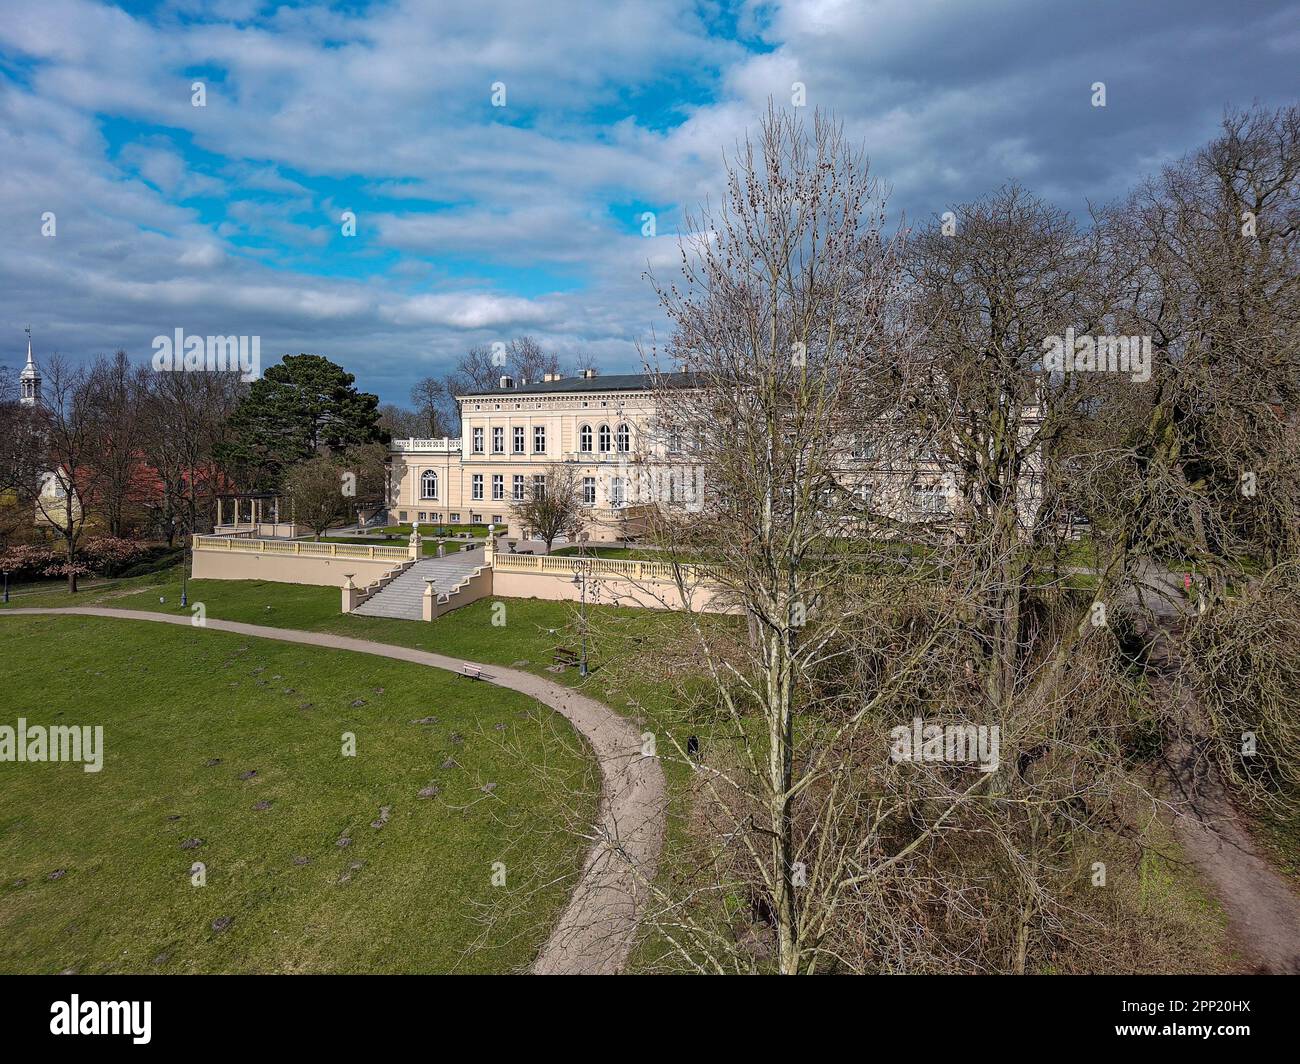 Palace and park complex in the city of Ostromecko, Poland. Stock Photo